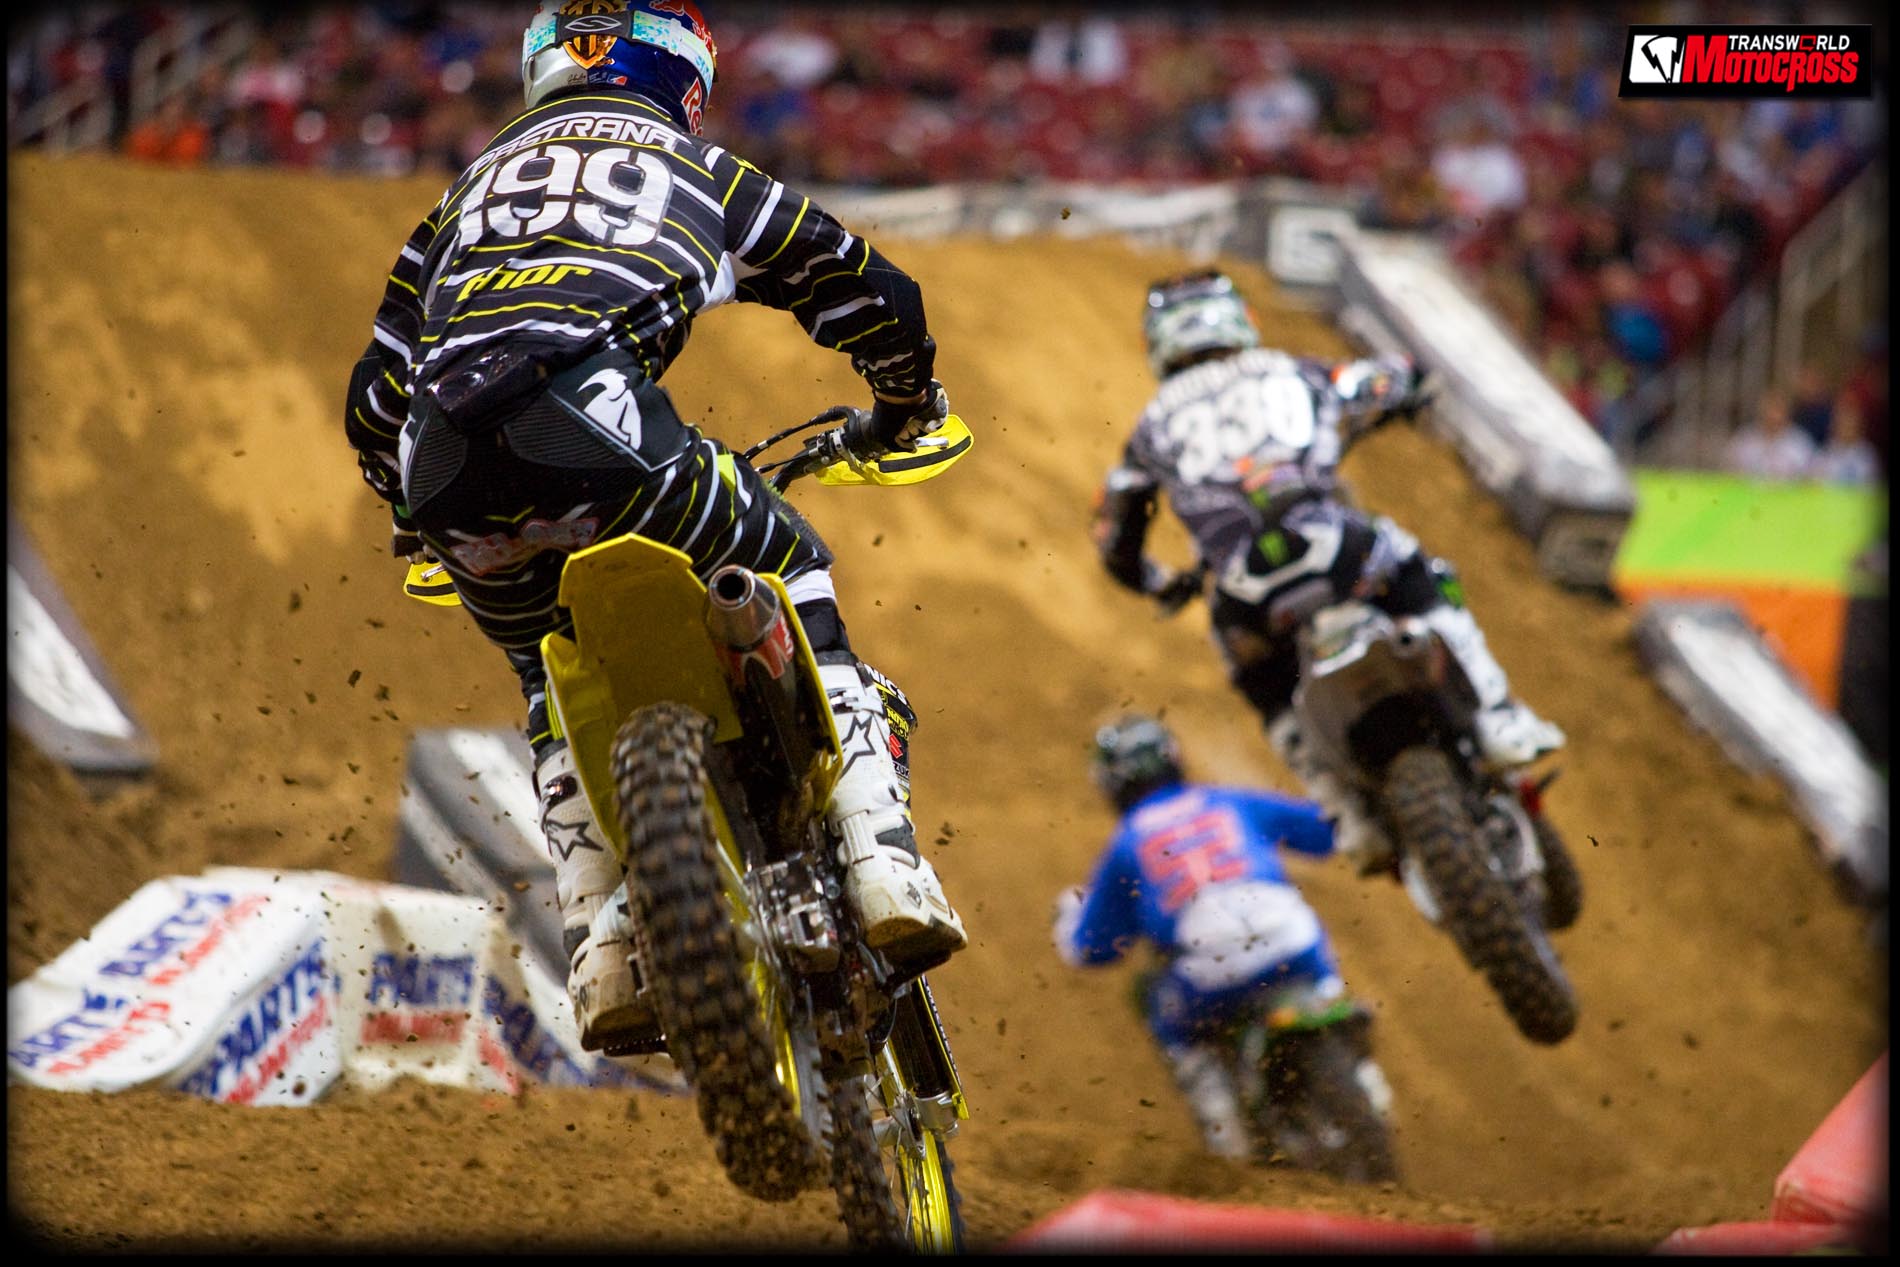 Wednesday Wallpapers St. Louis Transworld Motocross